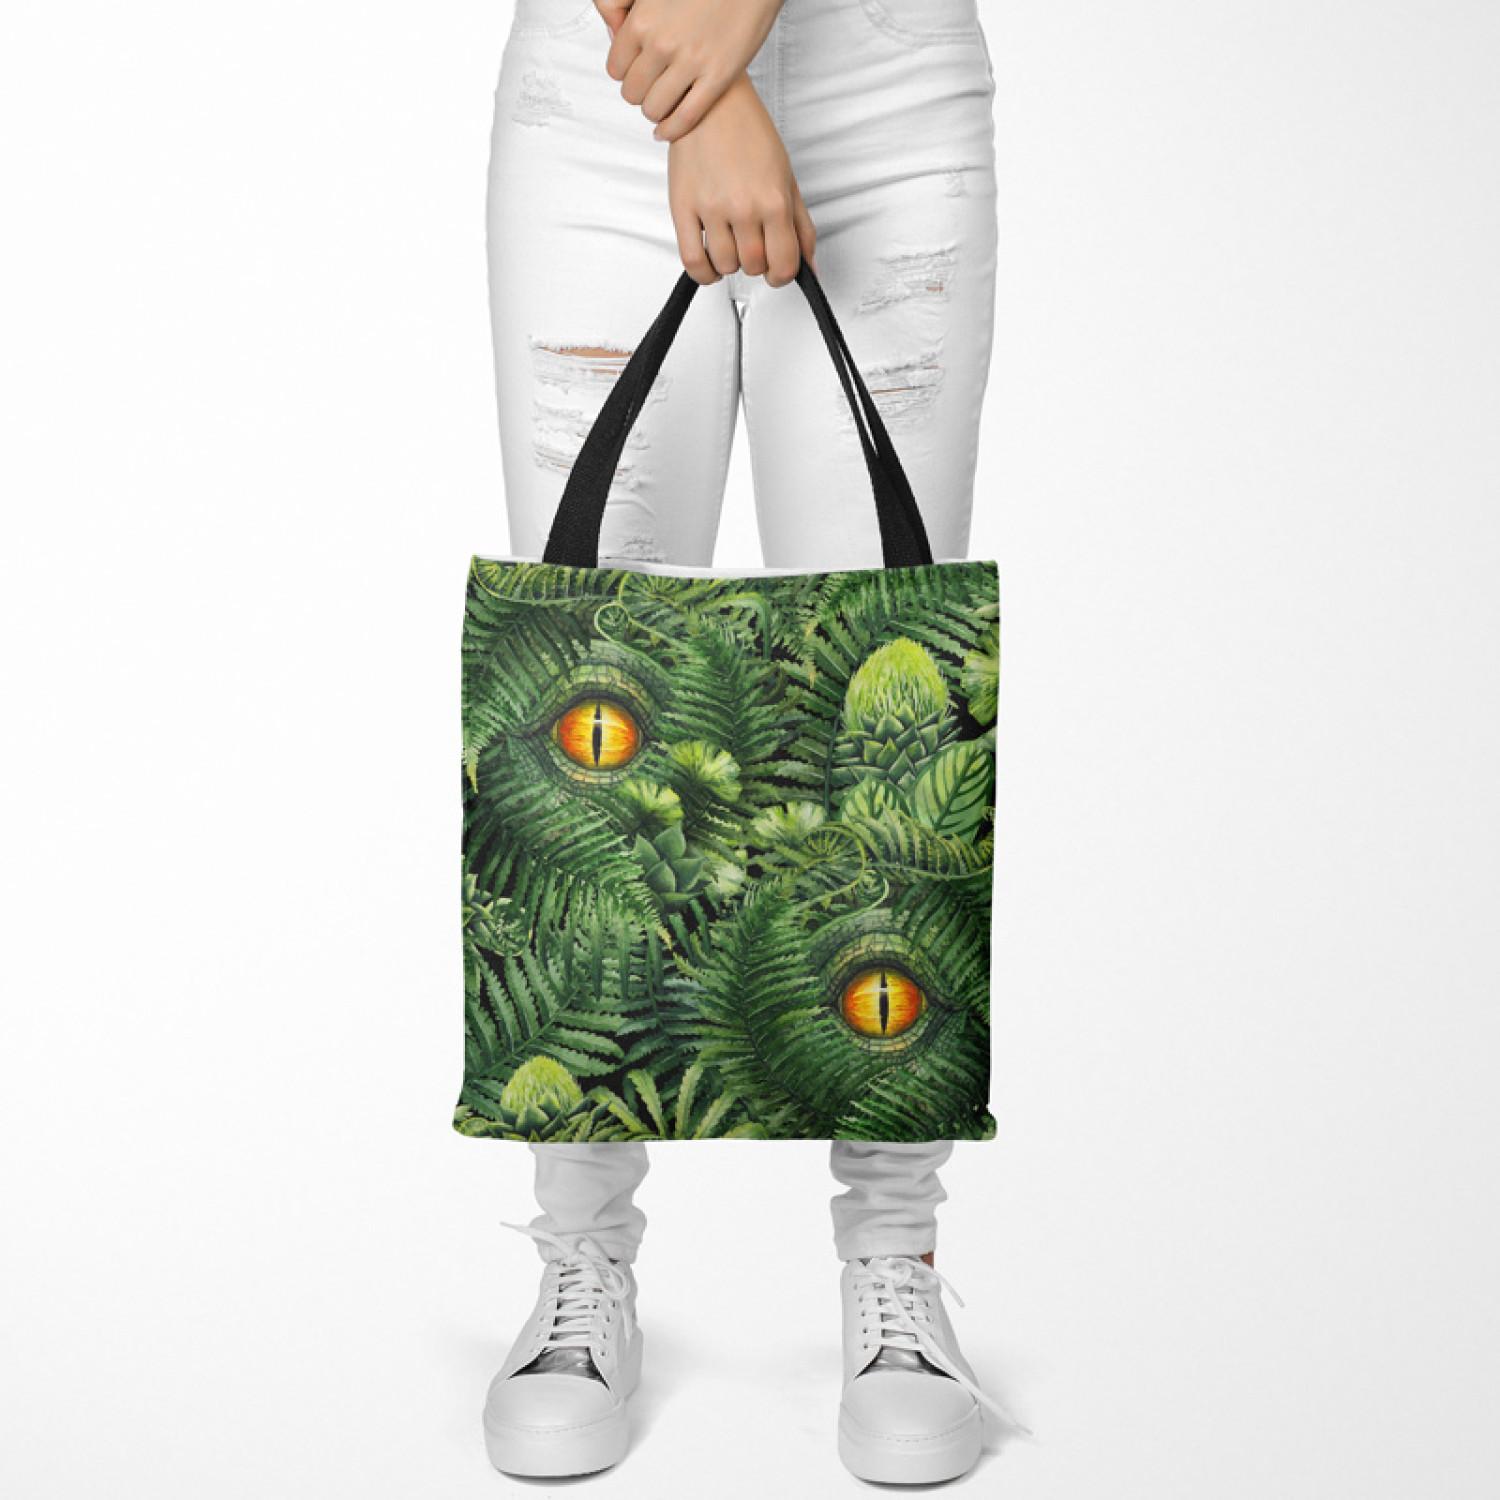 Shopping Bag Wild eye in the midst of greenery - floral motif with fern leaves